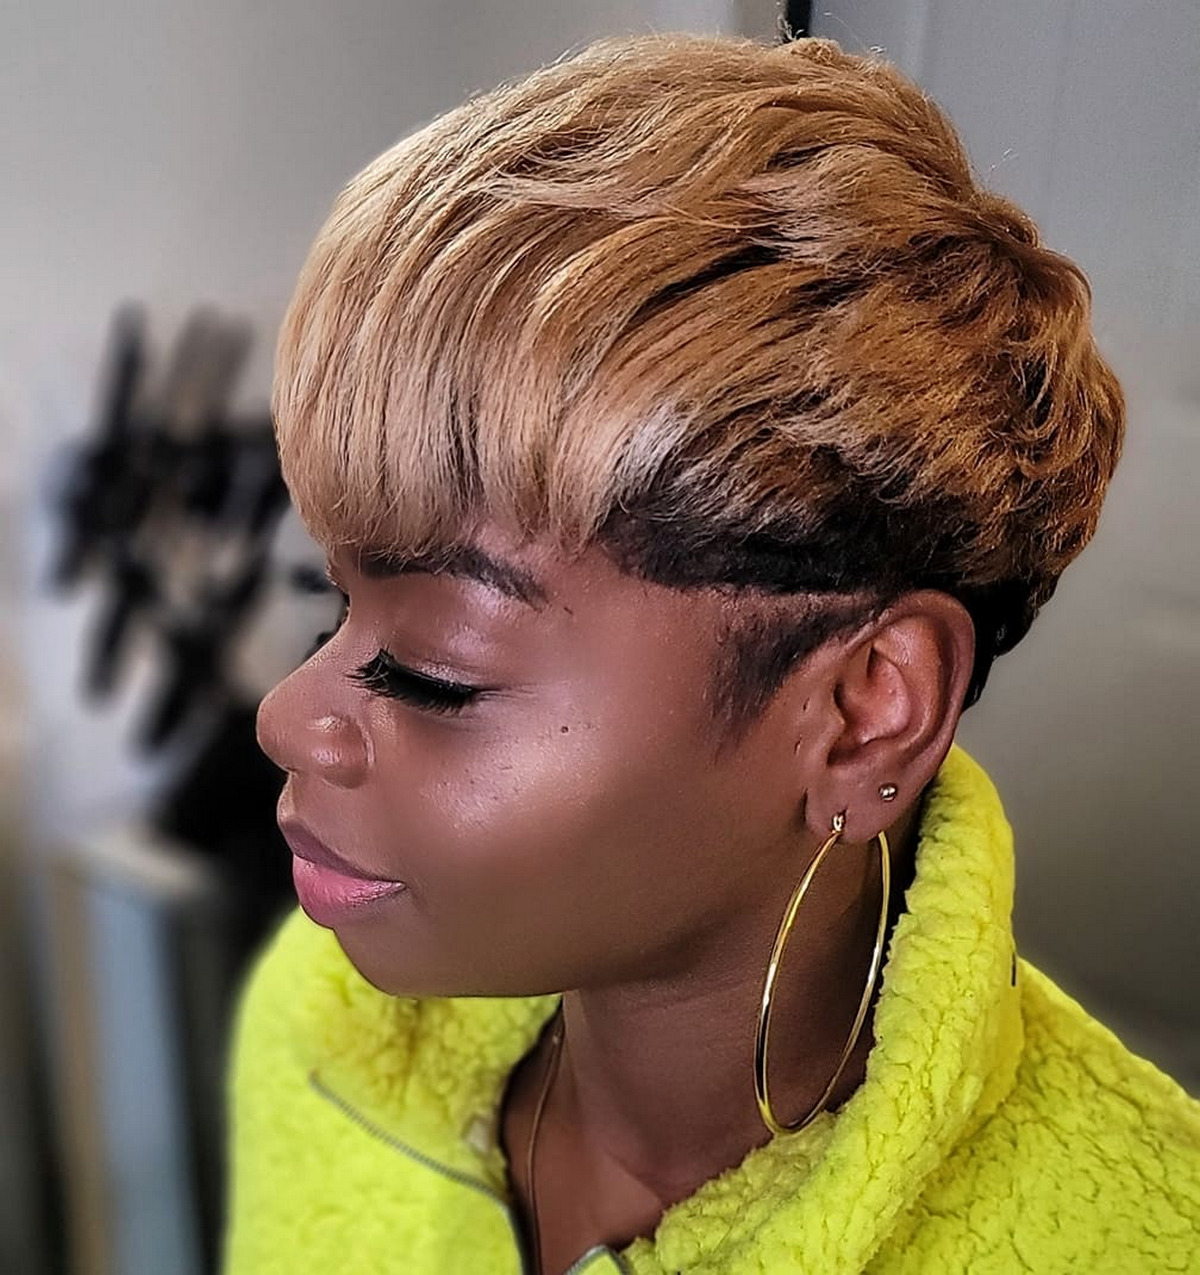  Blonde Cropped Cut With A Shaved Line